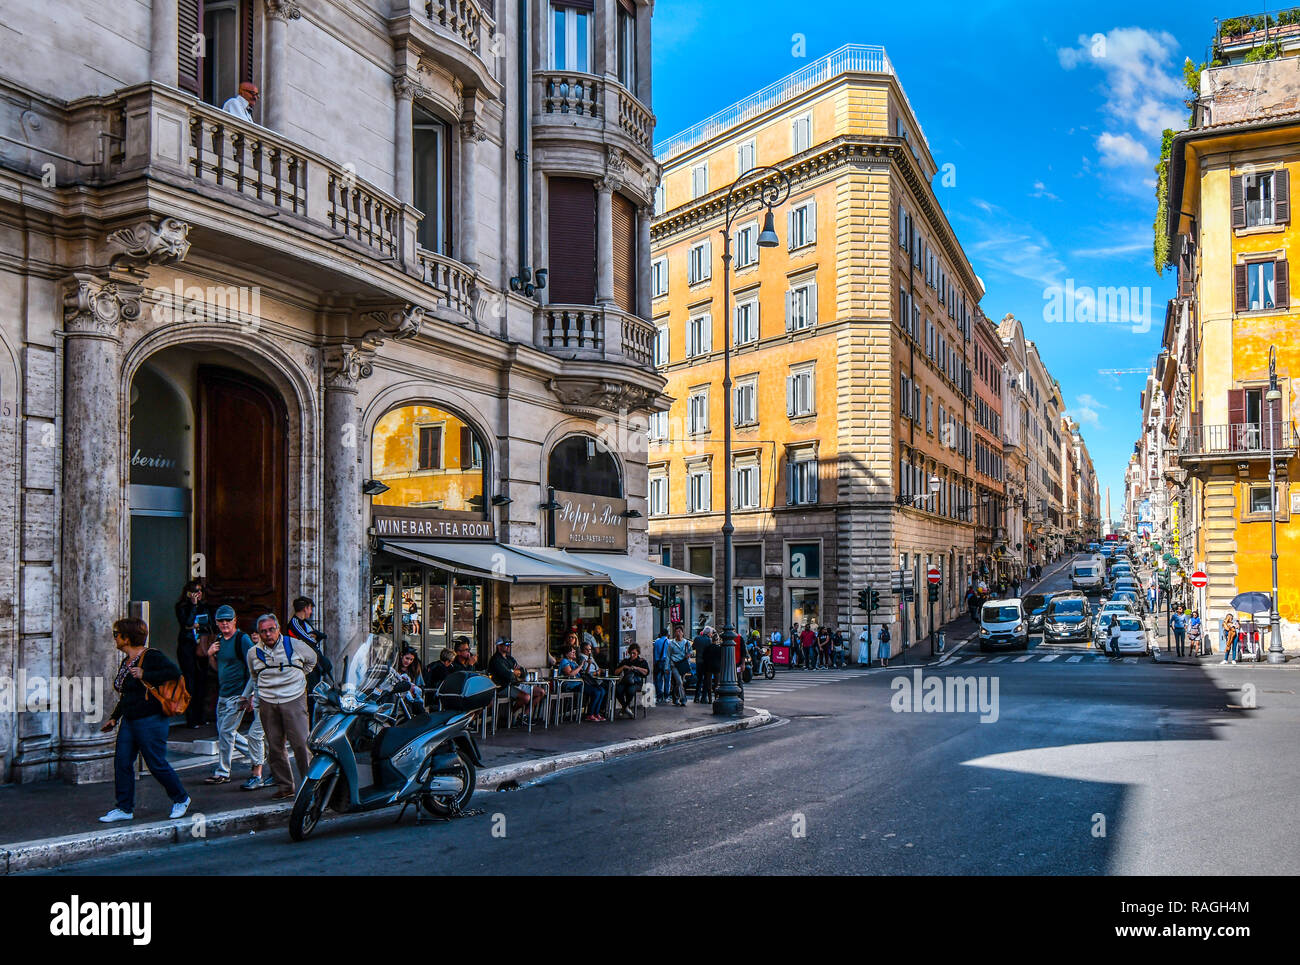 Rome, Italy - September 29 2018: Tourists enjoy lunch at a sidewalk cafe on a busy intersection in the historic center of Rome, Italy. Stock Photo